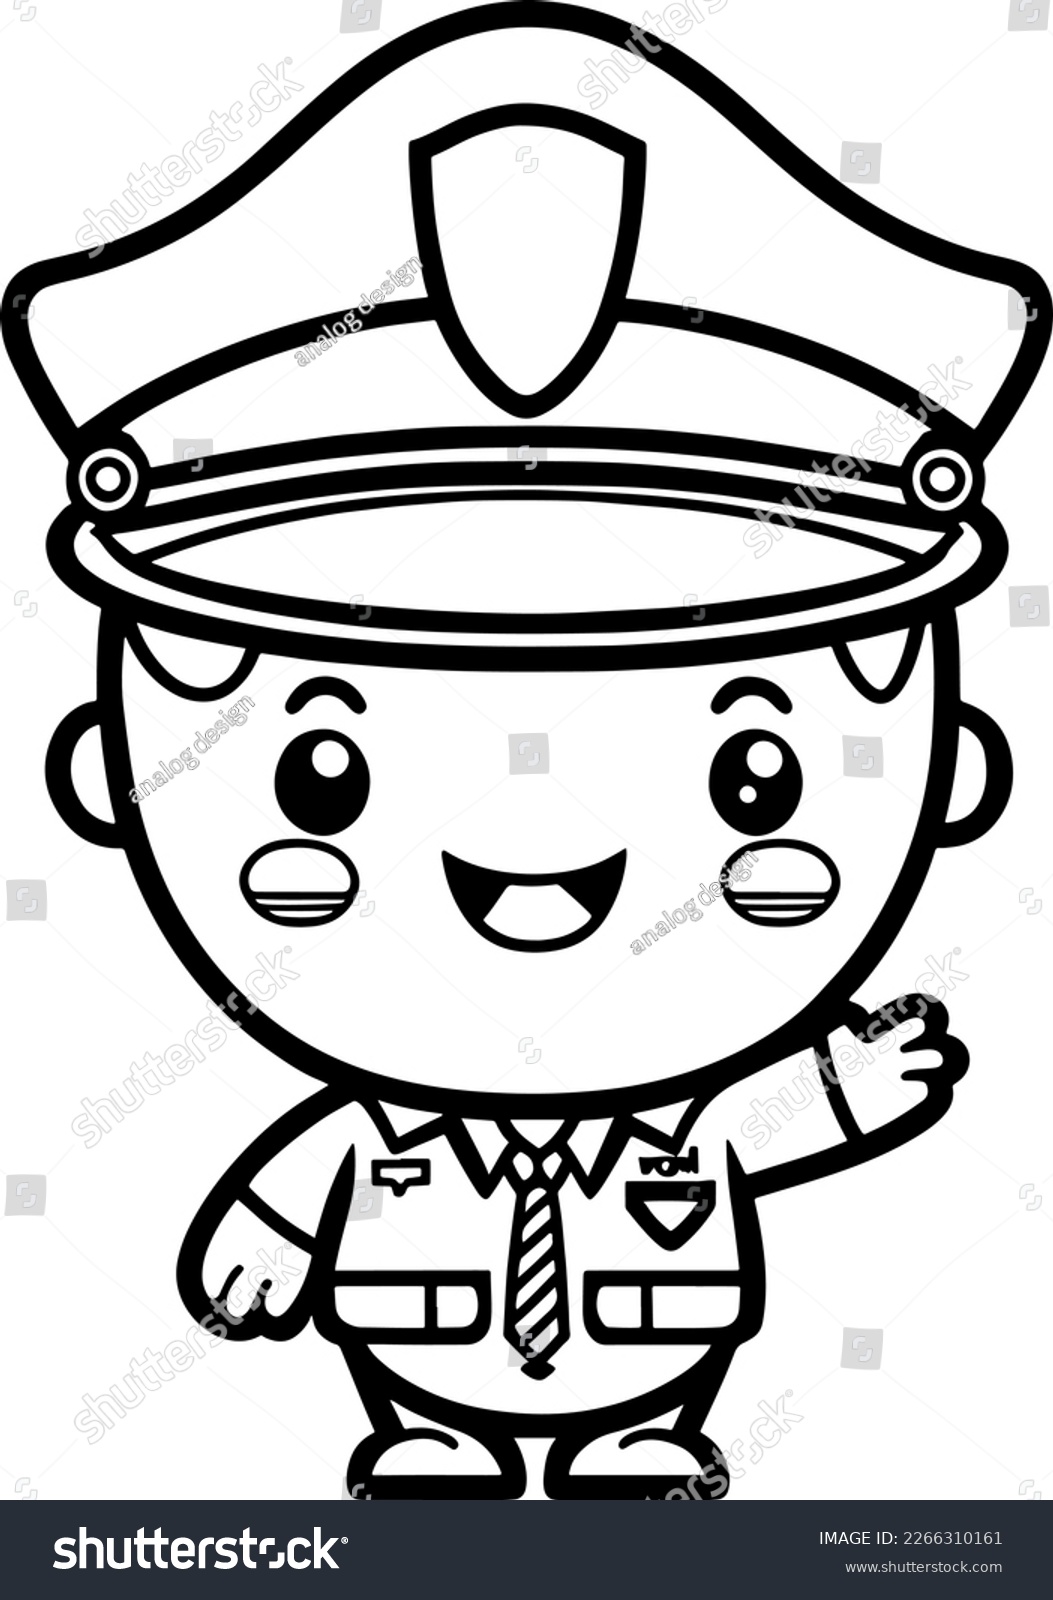 SVG of cute cartoon Cheerful Police Officer svg vector graphic svg